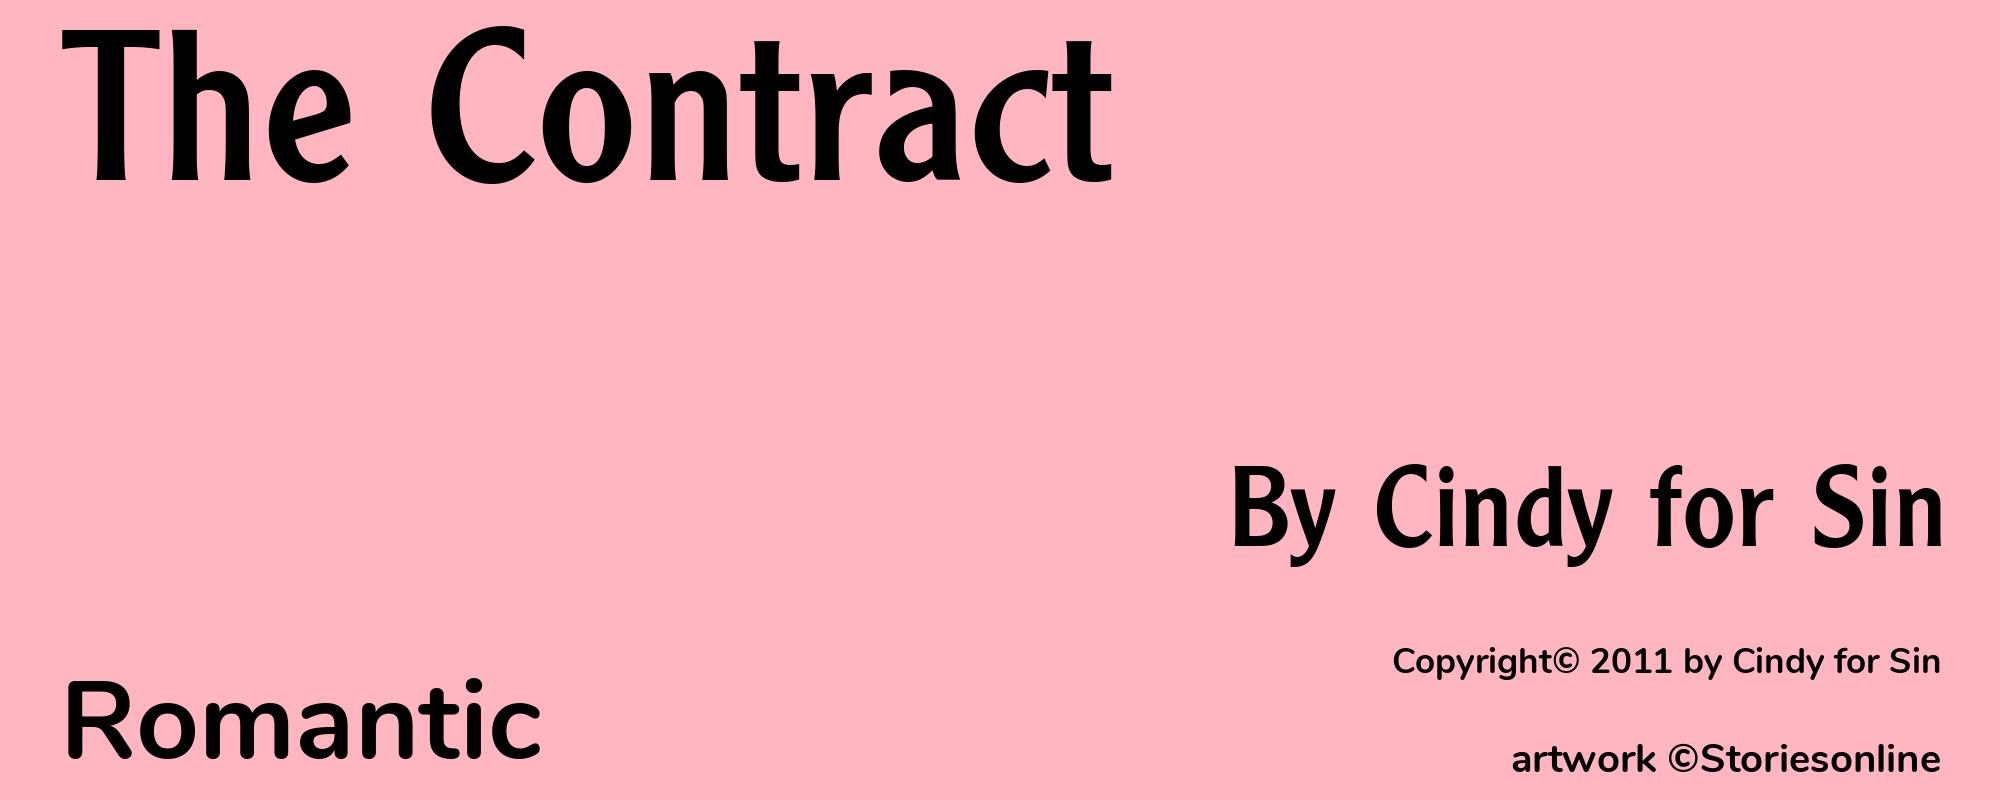 The Contract - Cover